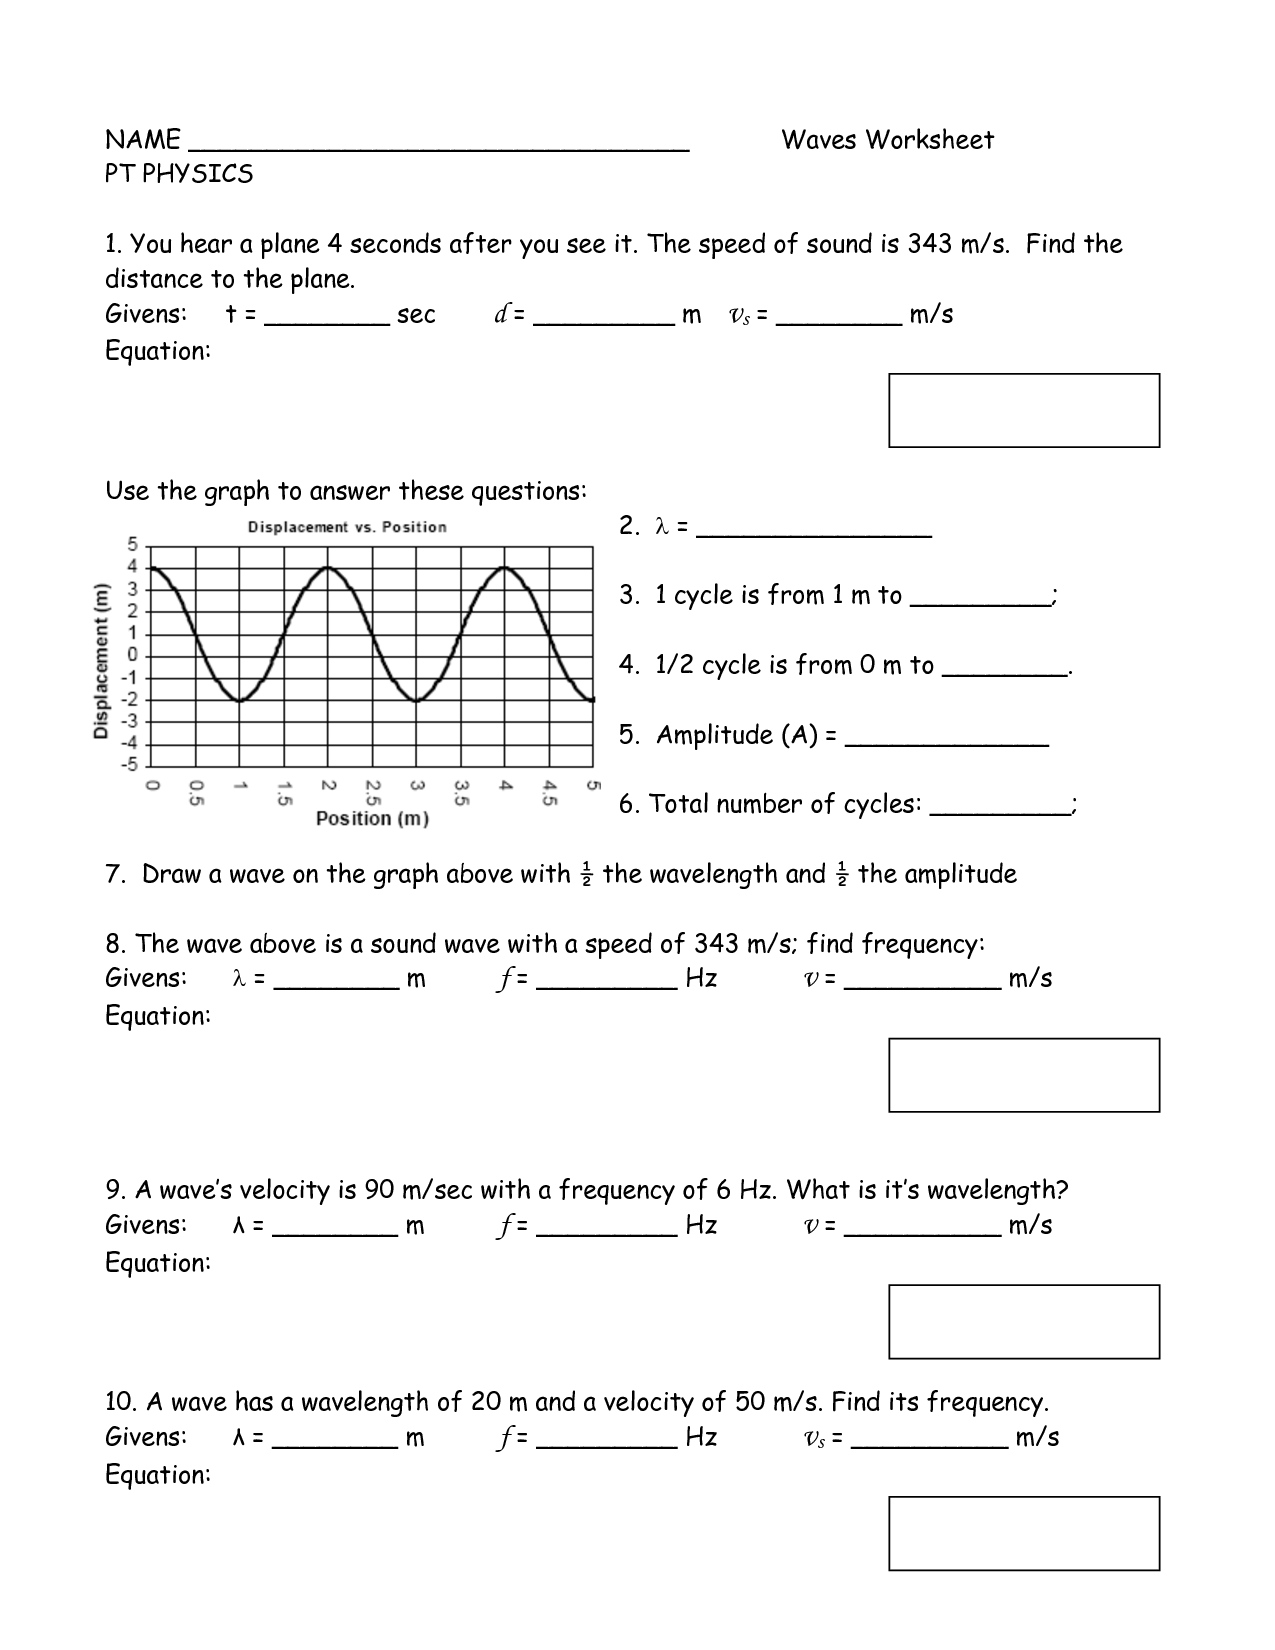 12 Images of Sound Energy Worksheets